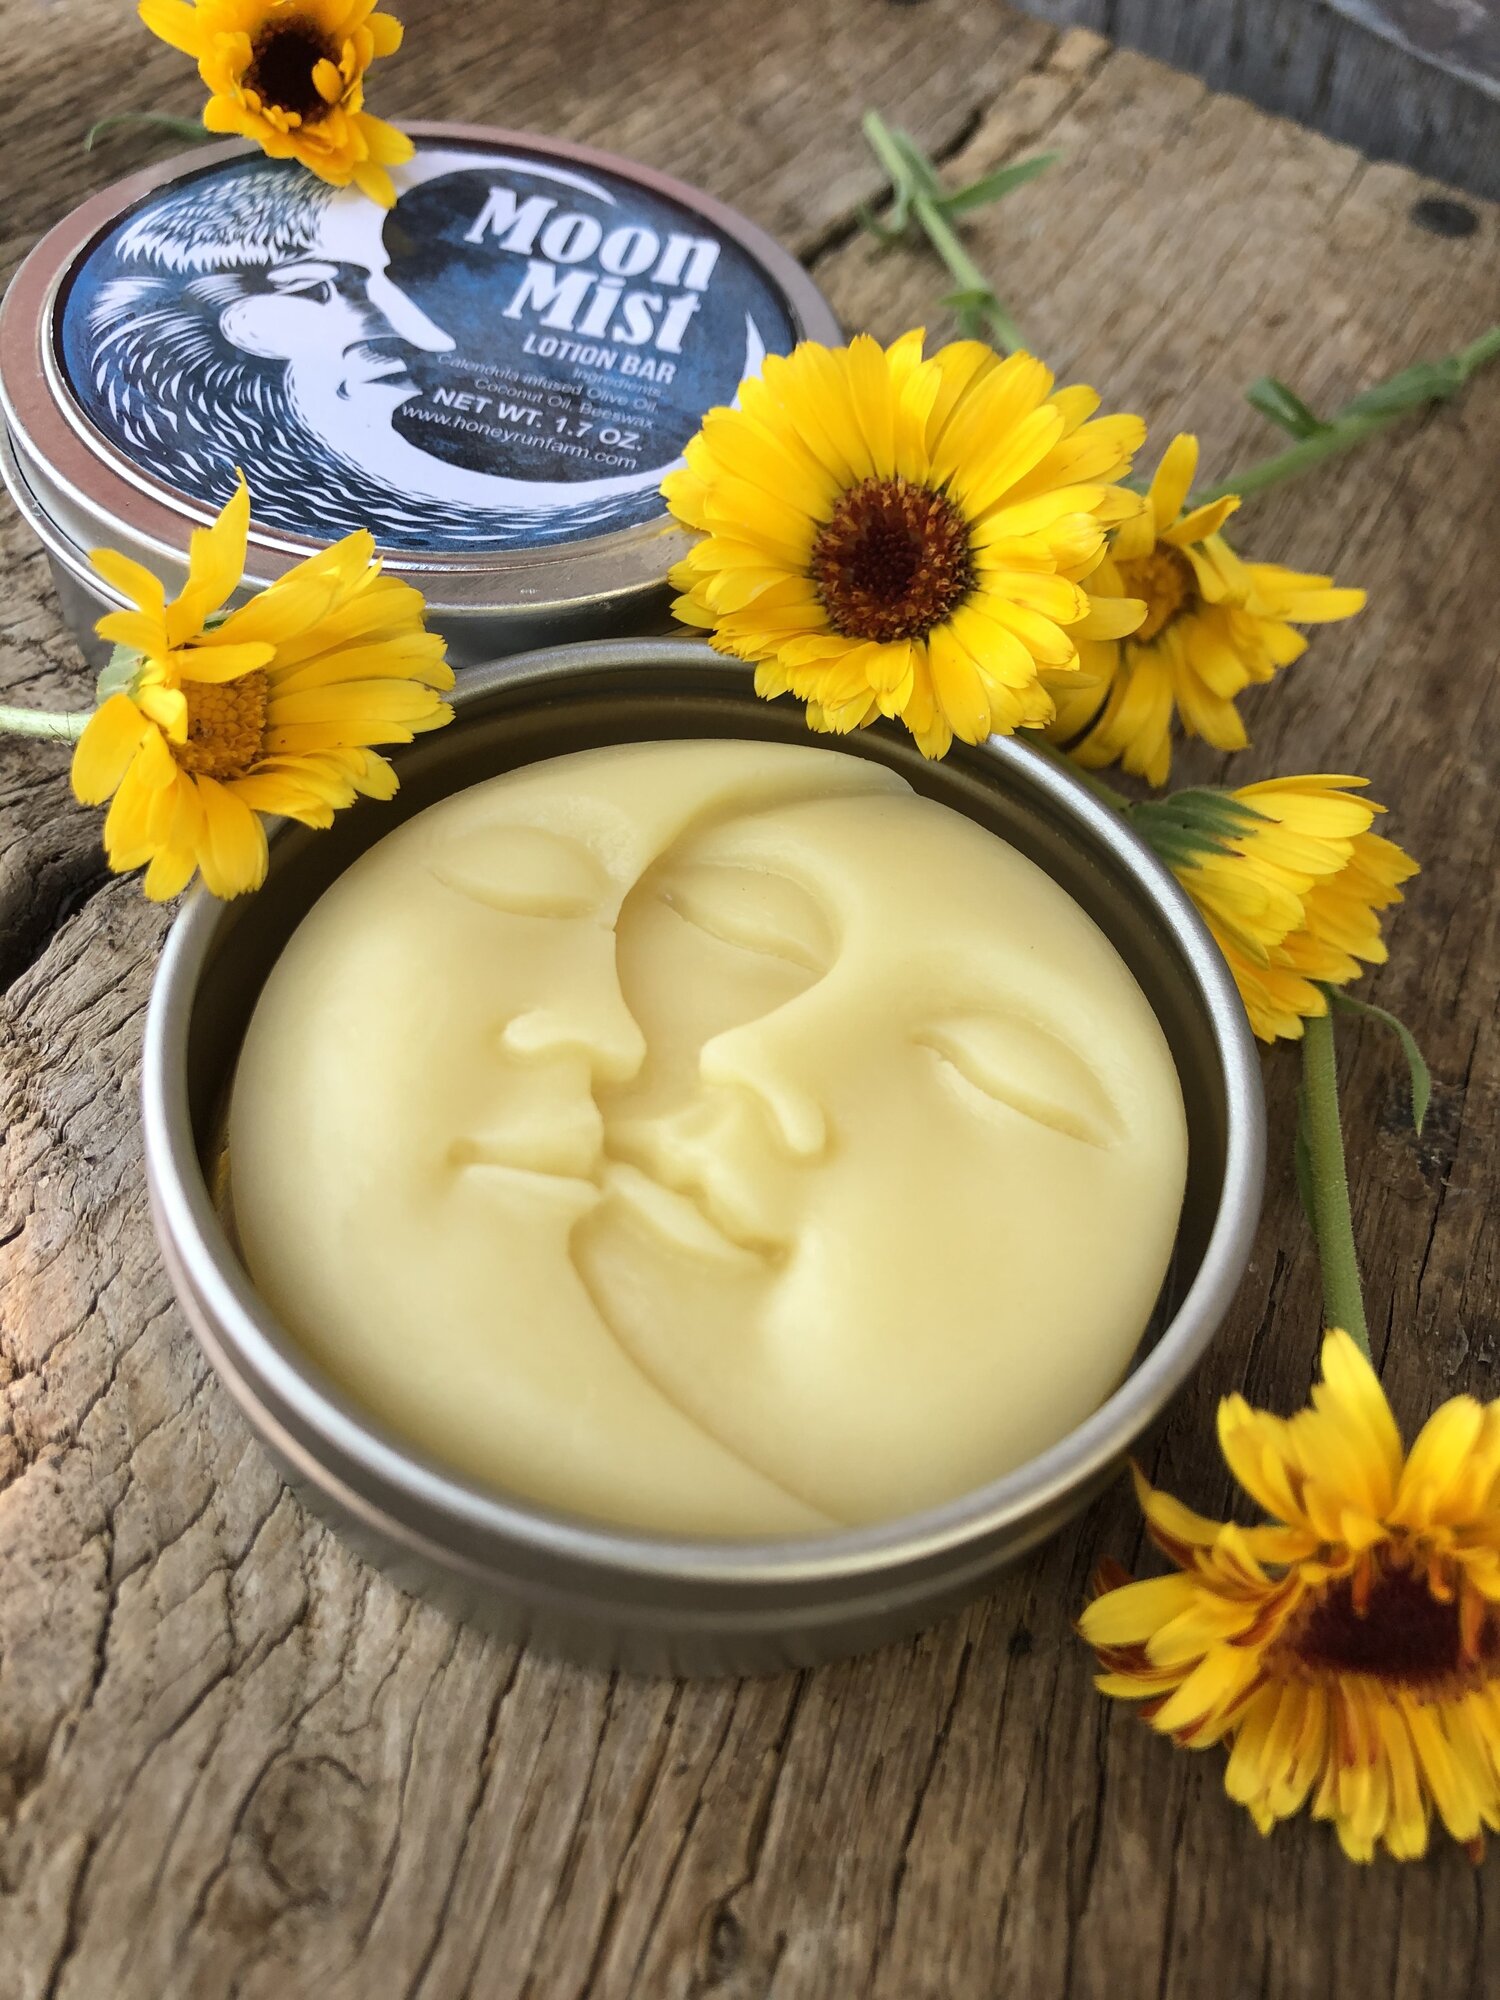 Moon Mist Lotion Bar - made with beeswax, coconut oil, and olive